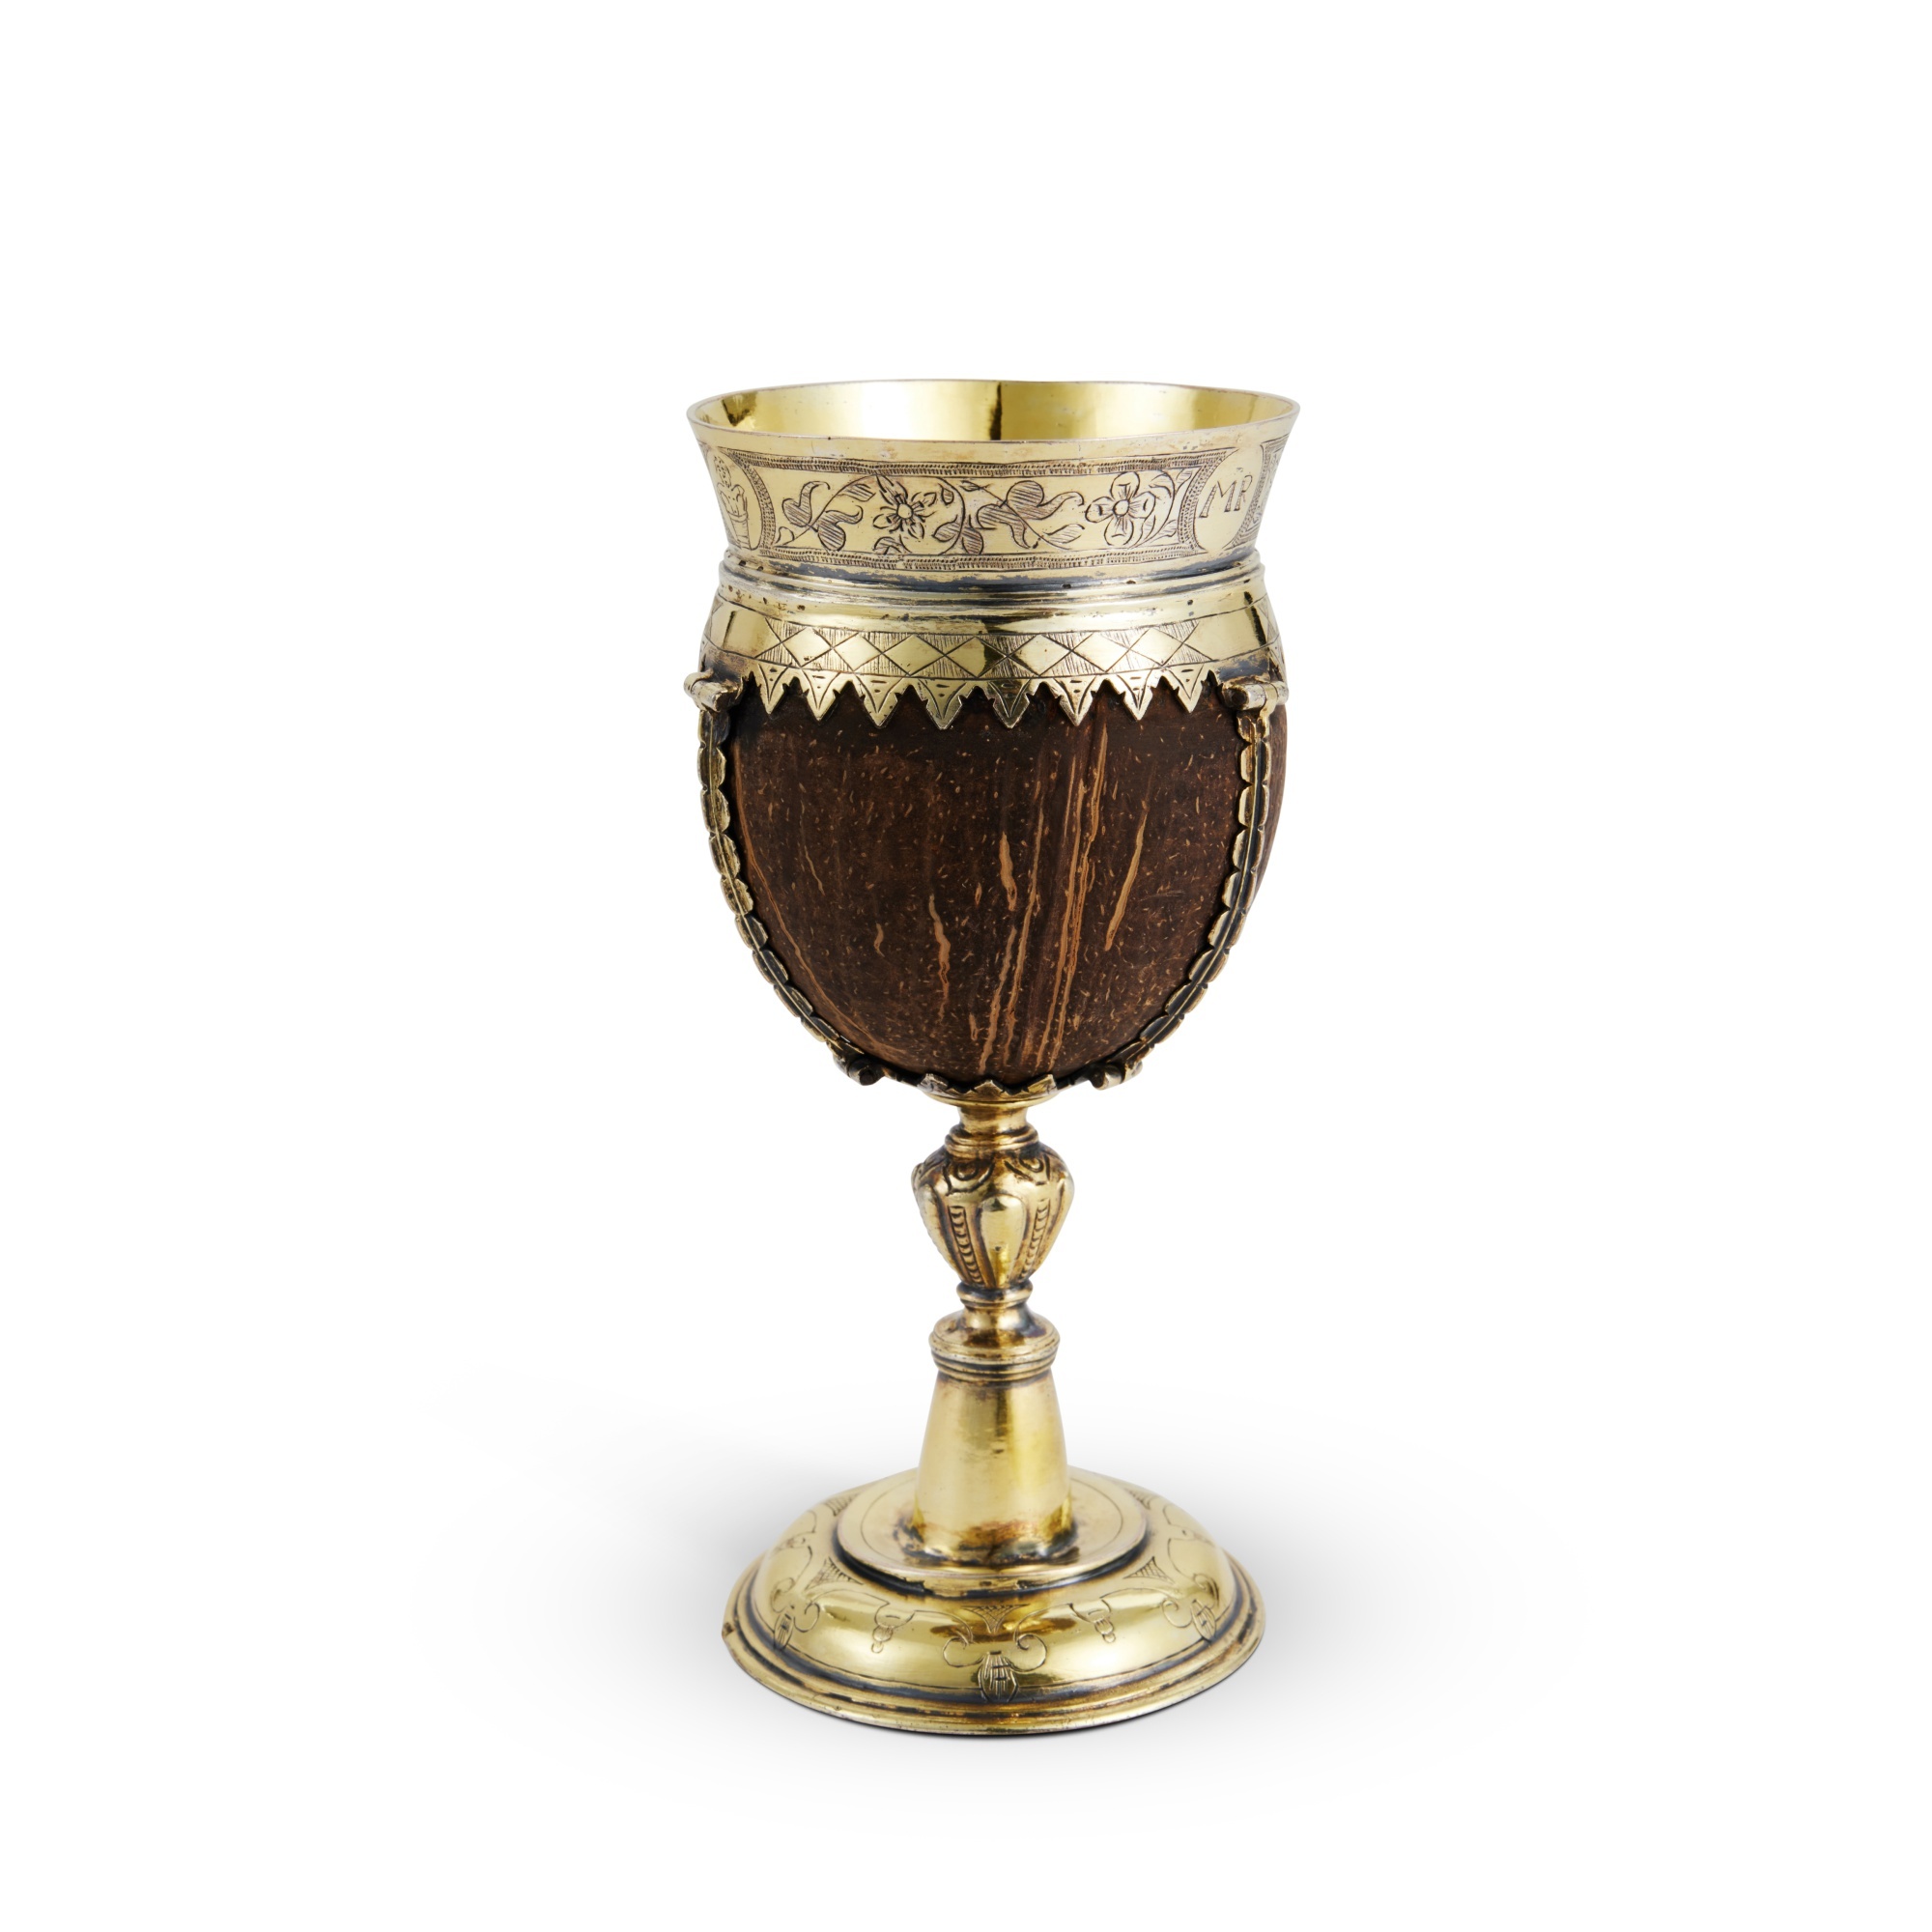 A Silver-Gilt-Mounted Coconut Cup, Probably German, Early 17th Century - Image 2 of 4